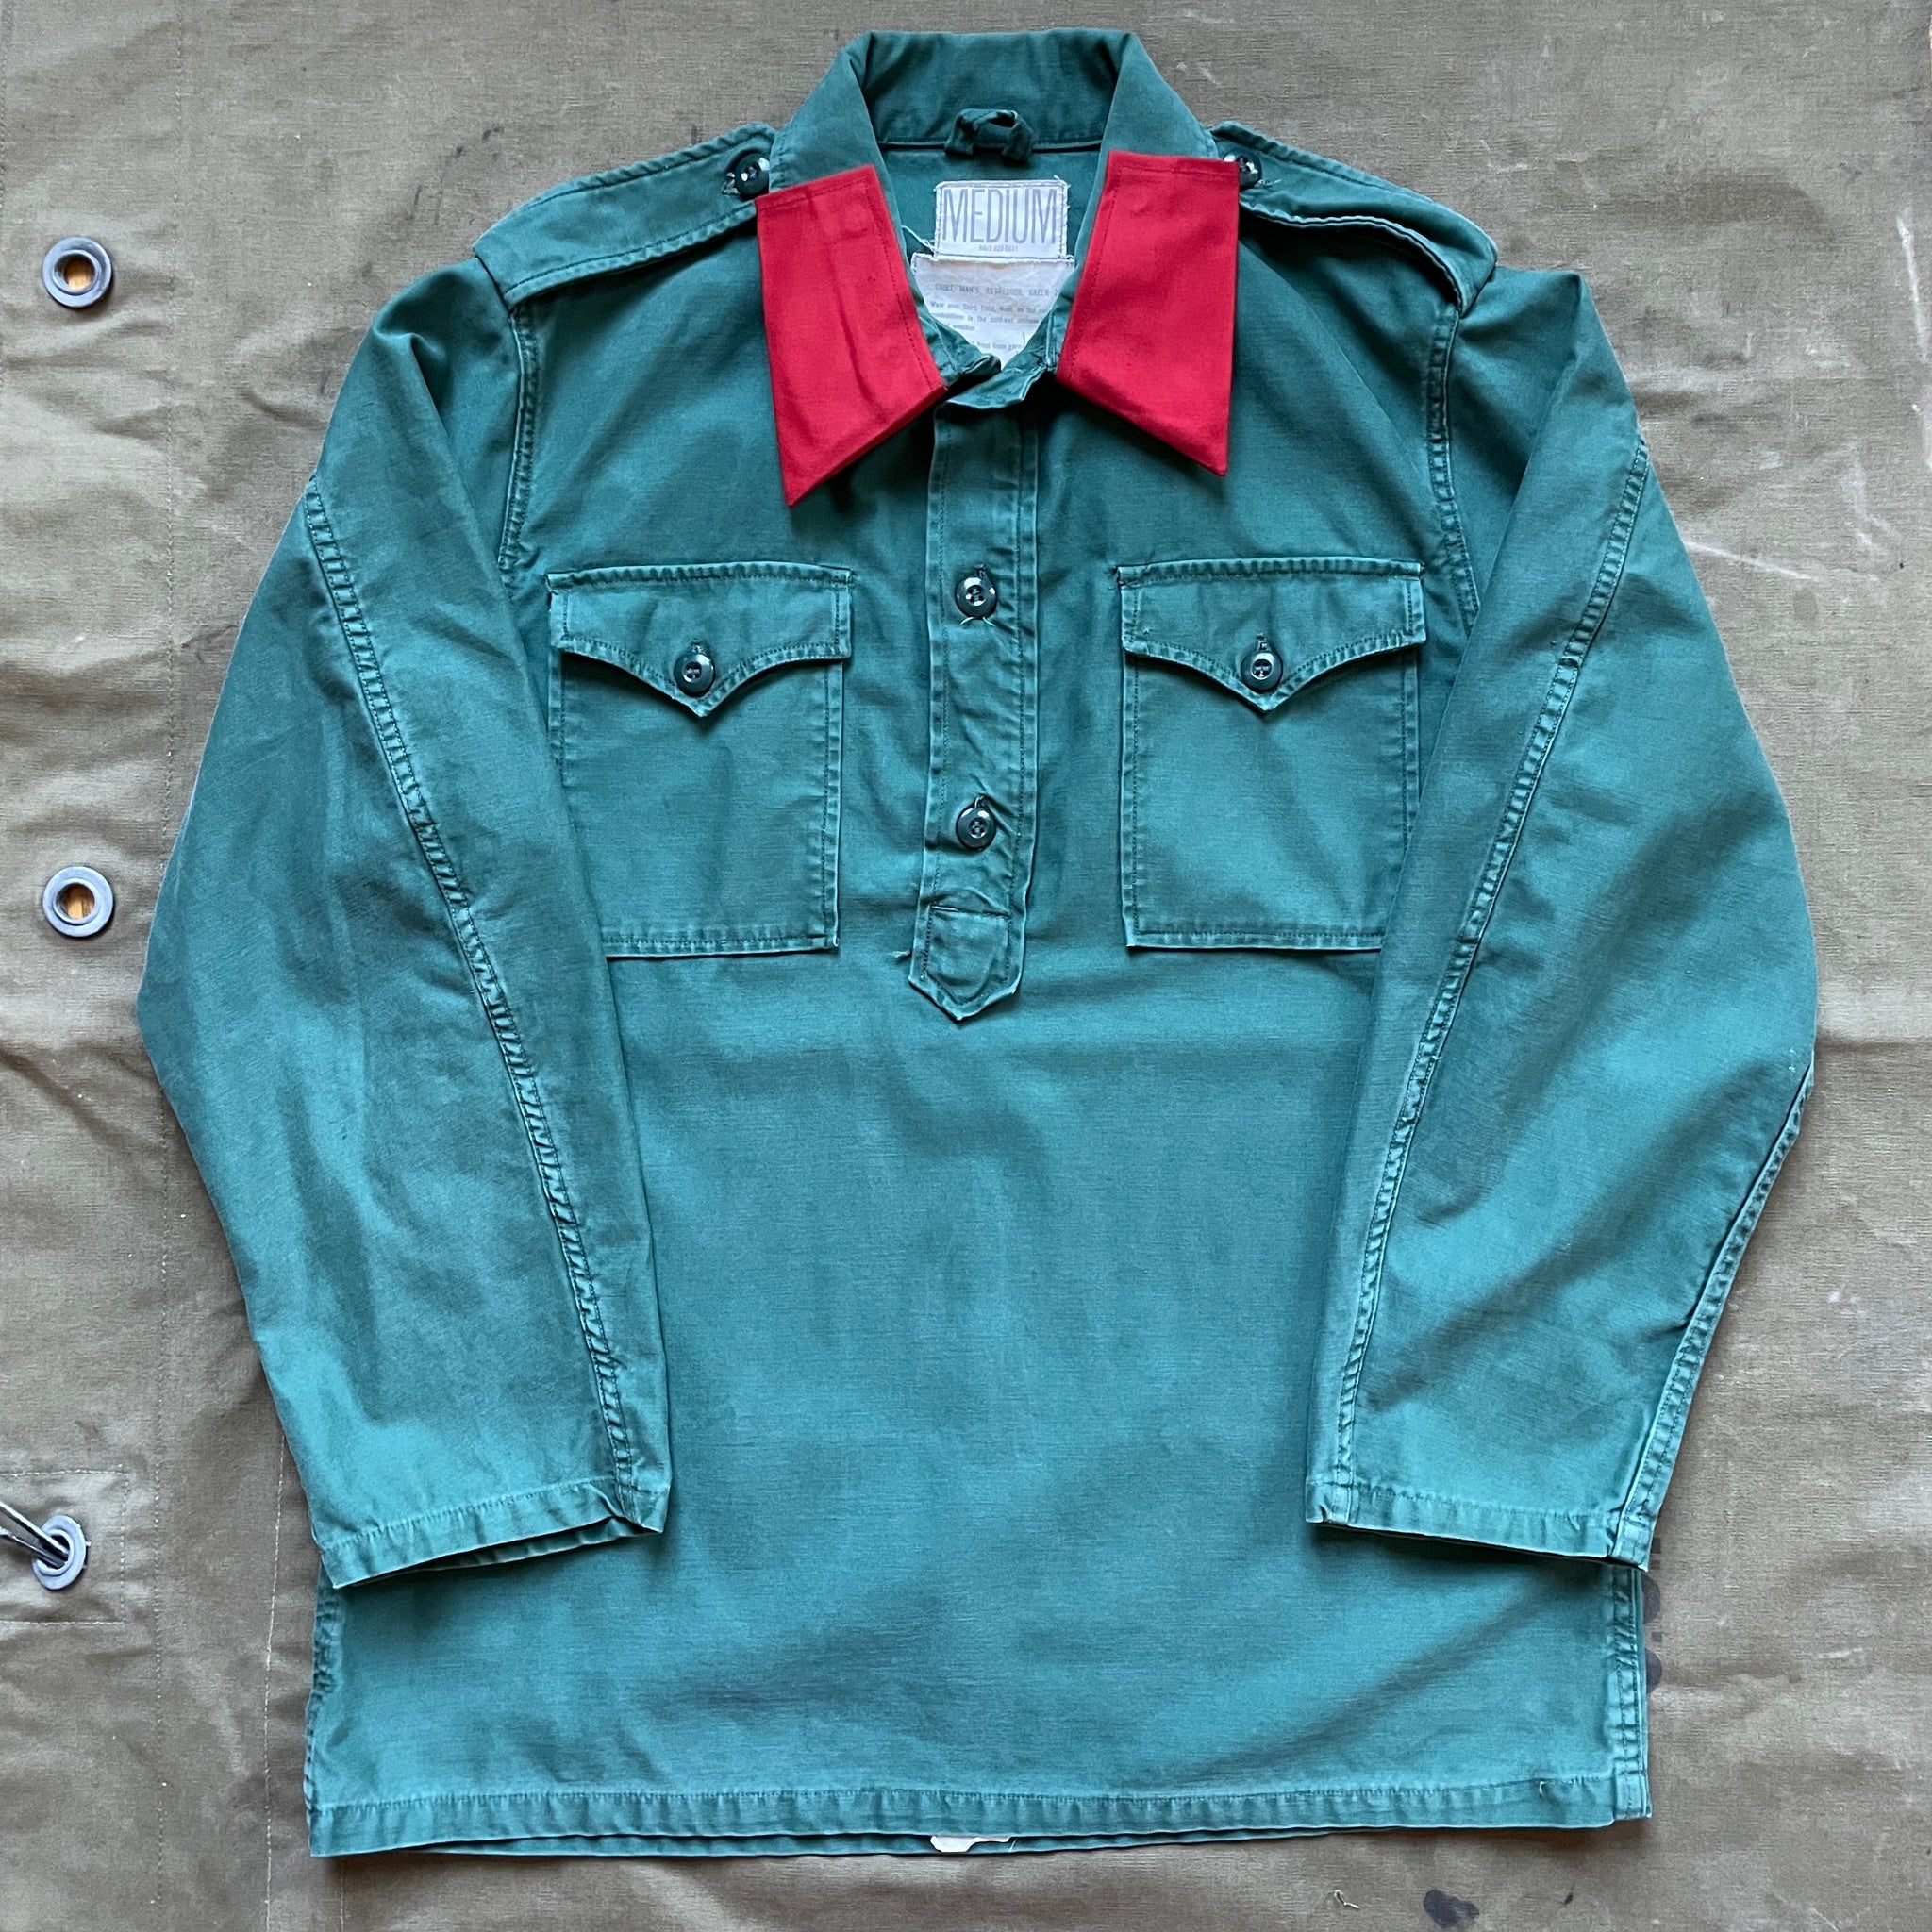 US Army 1950s Aggressor Shirt – The Major's Tailor